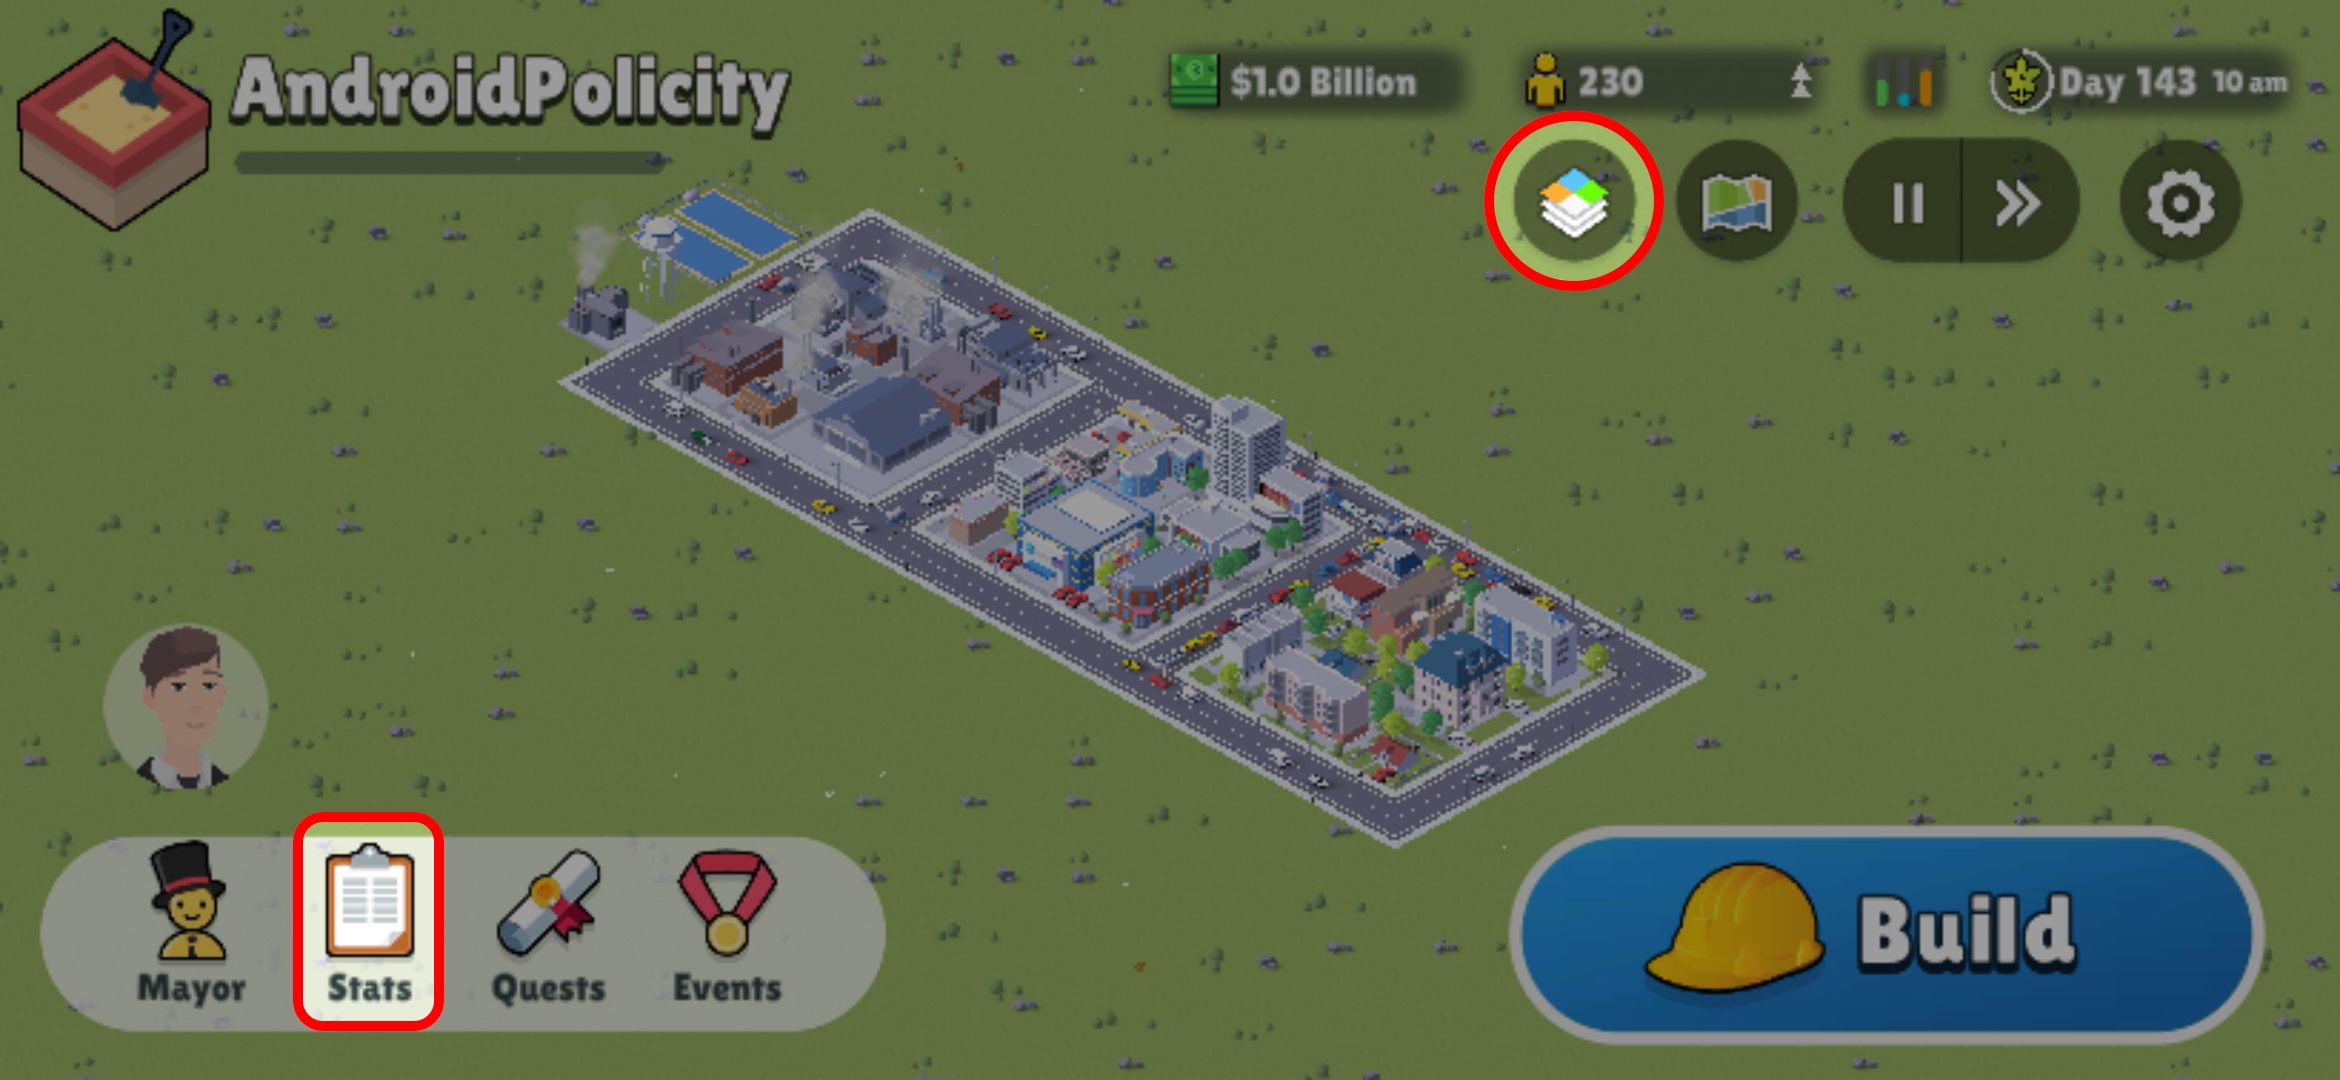 Pocket City 2 screen highlighting the Stats and Overlays options